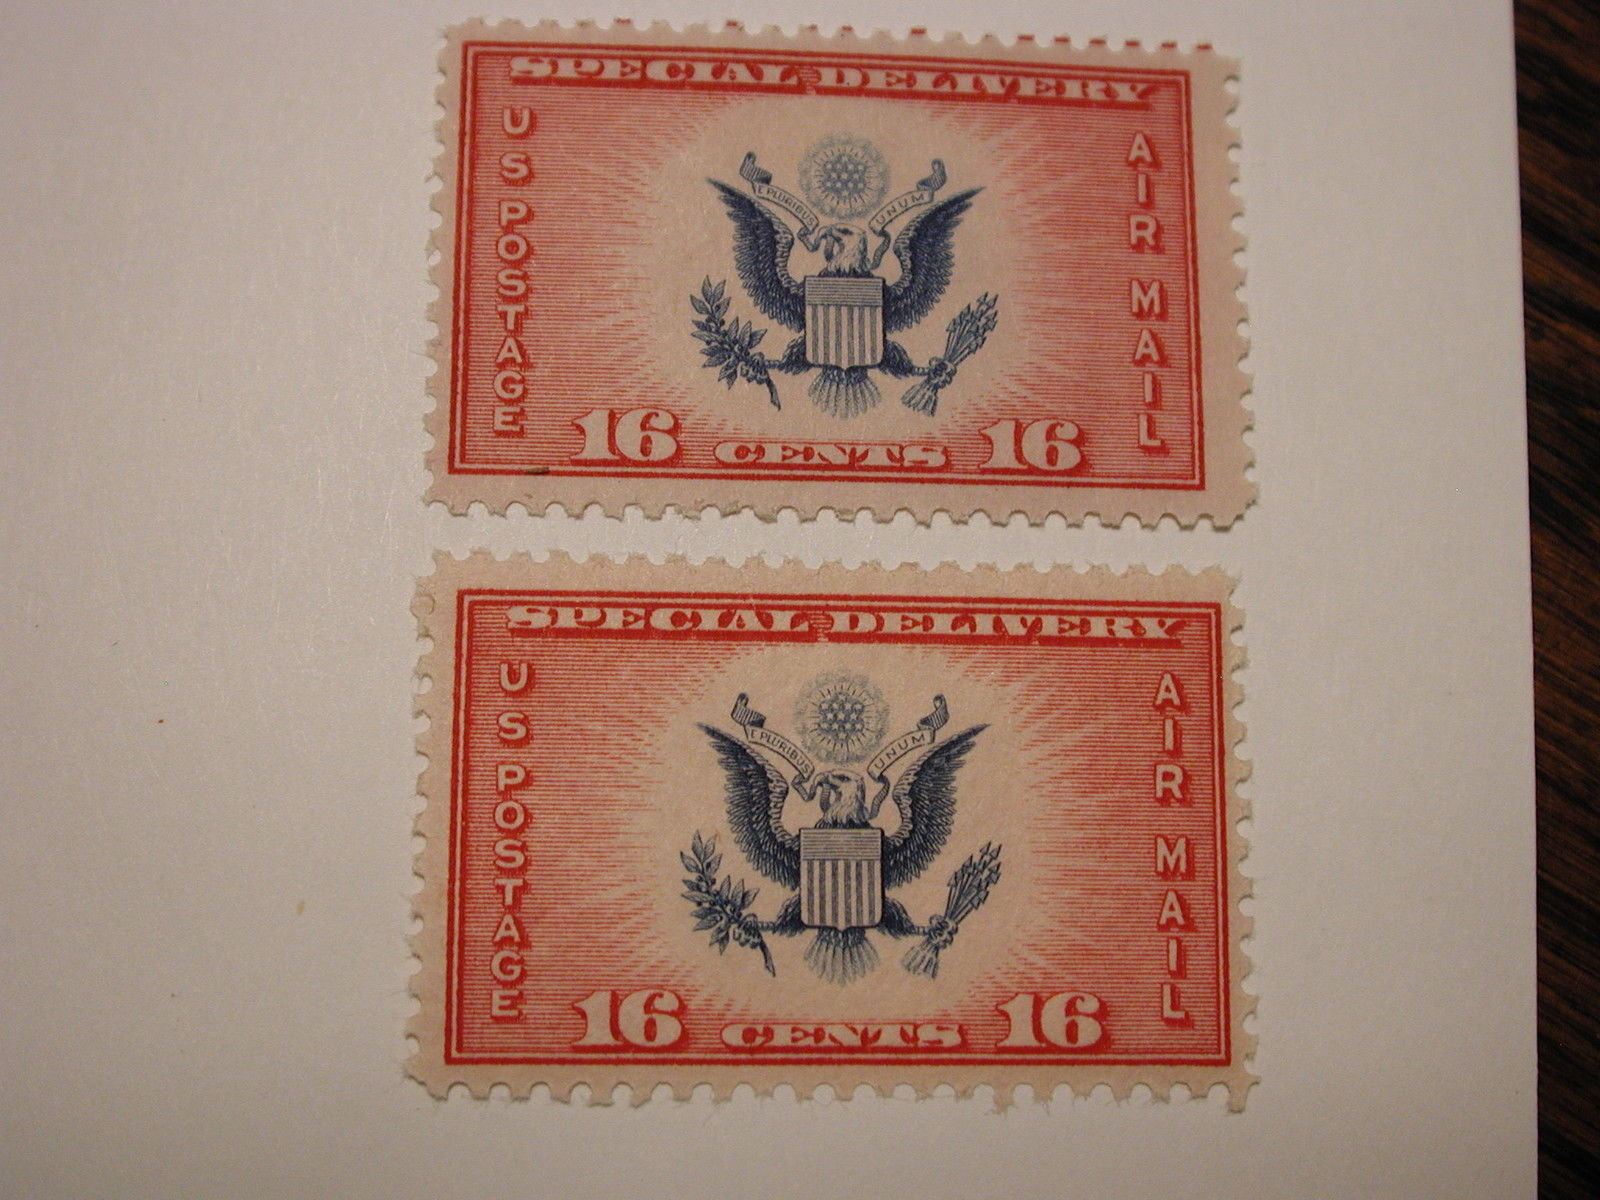 U.S. Scott #CE2 16 Cents Great Seal Airmail Special Delivery Set of Two, NH